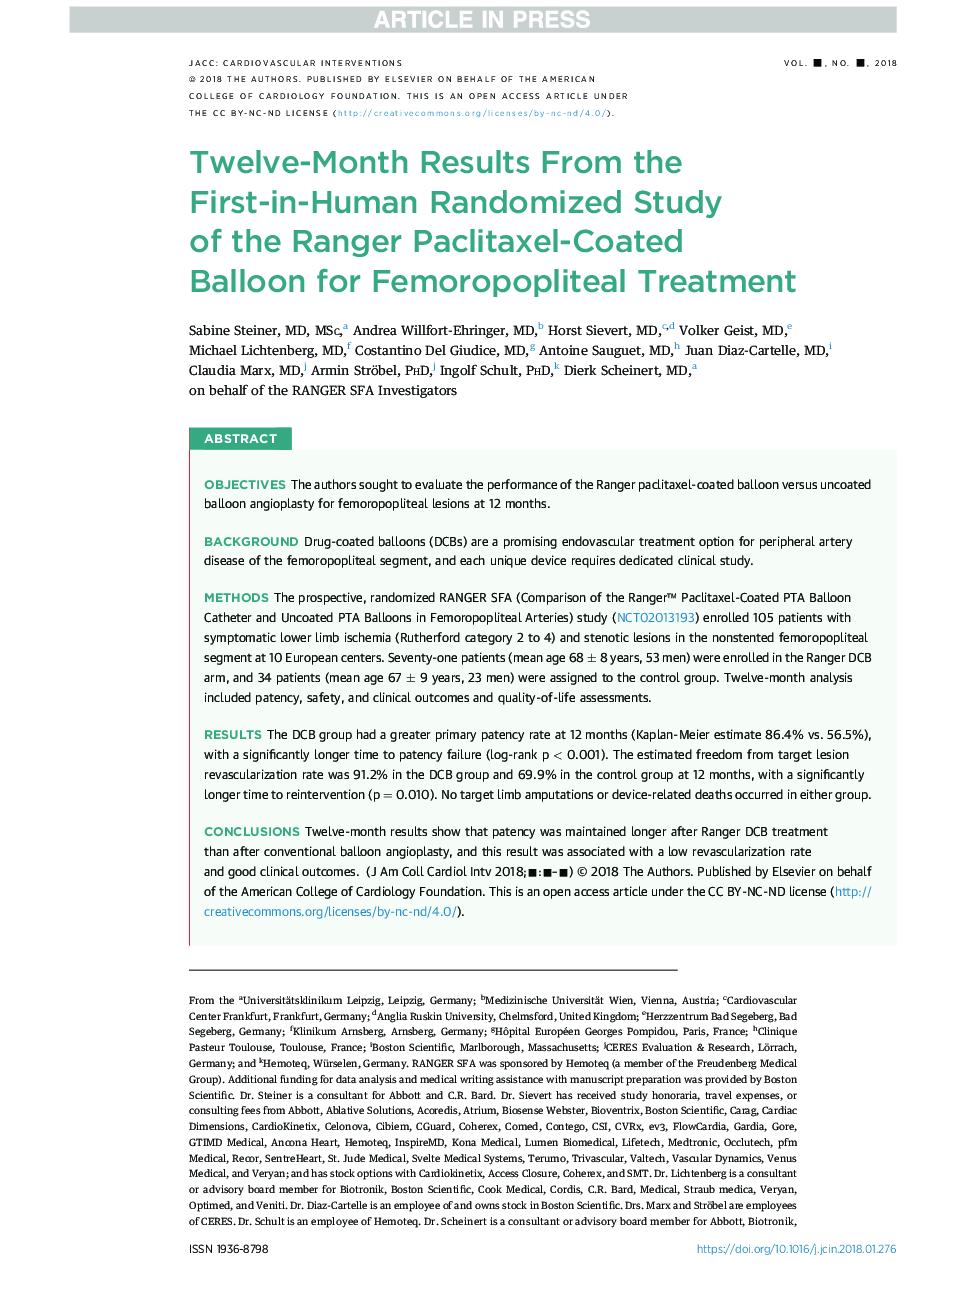 12-Month Results From the First-in-Human Randomized Study ofÂ theÂ Ranger Paclitaxel-Coated BalloonÂ for Femoropopliteal Treatment